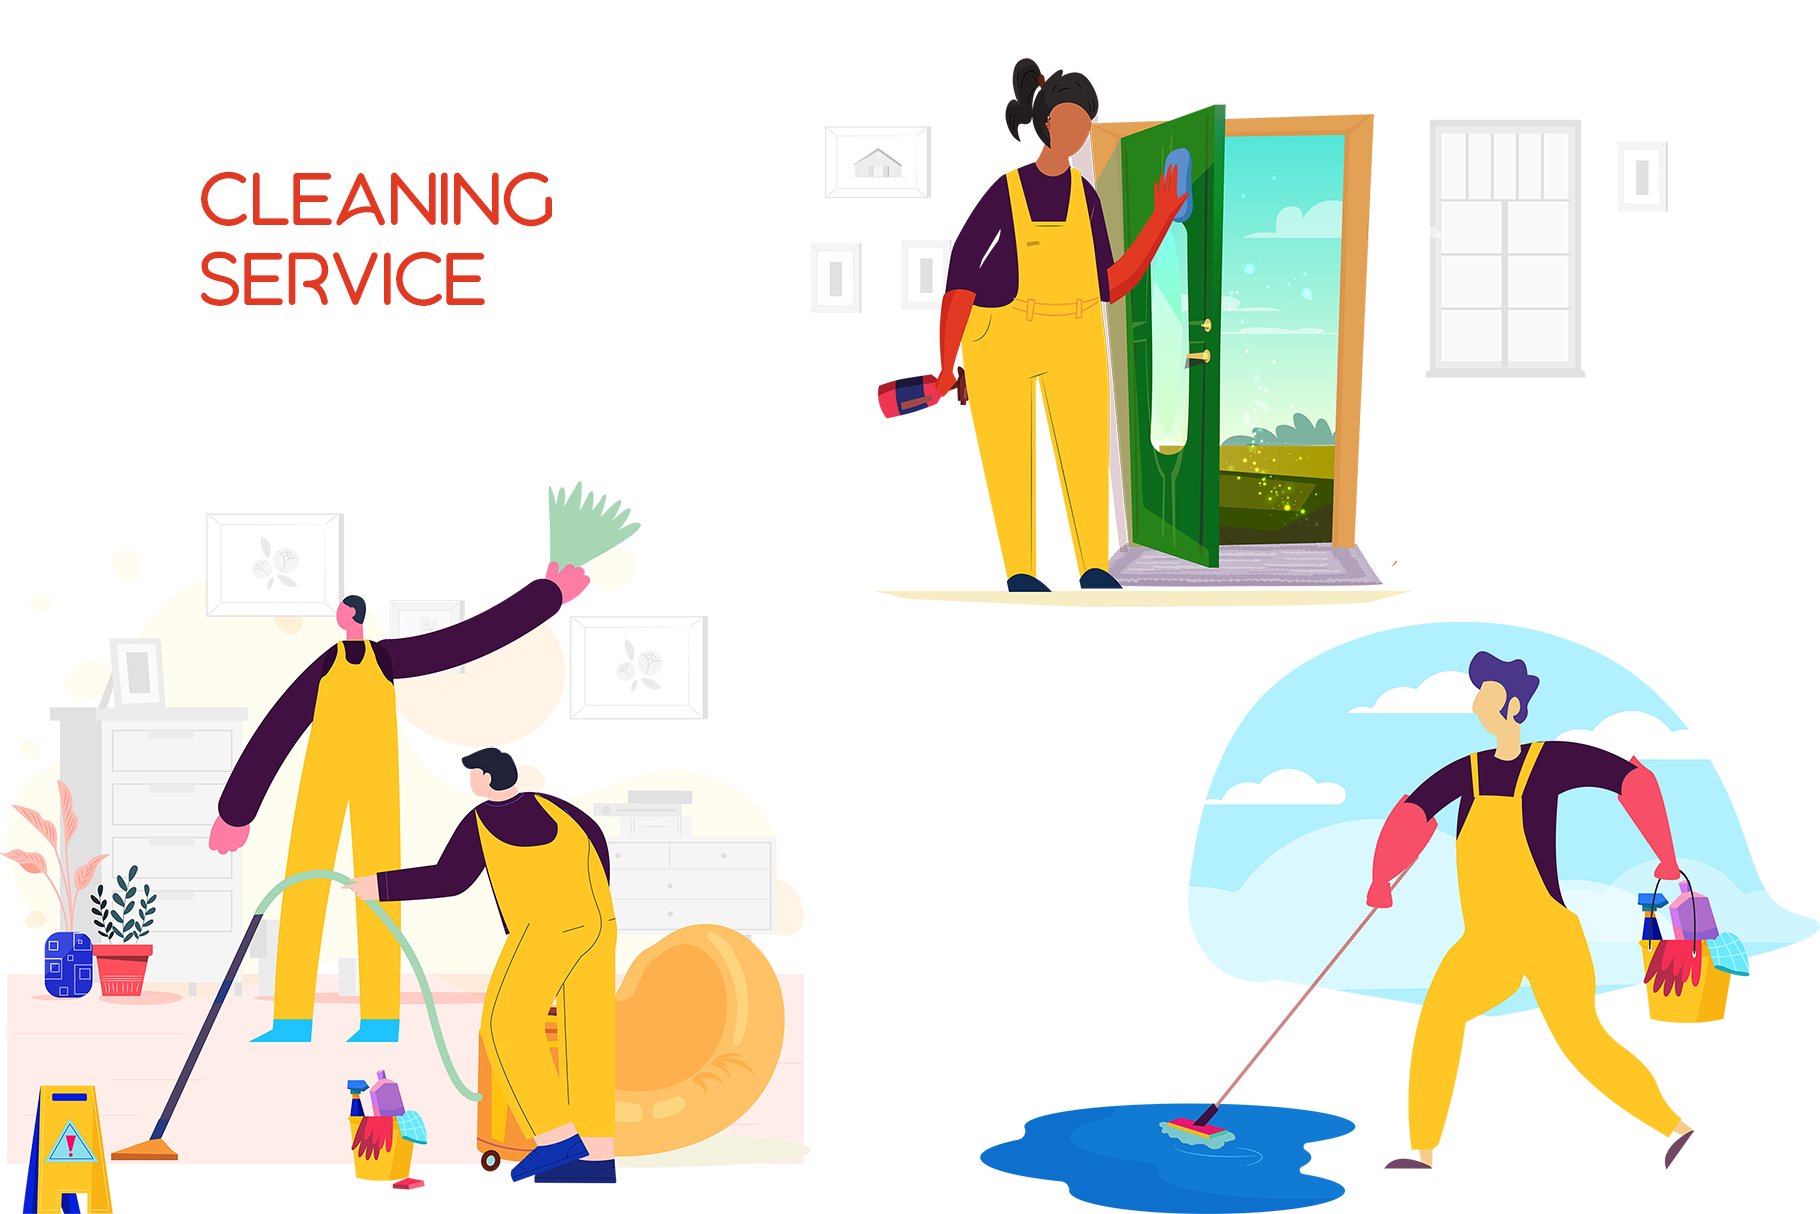 Cleaning Service cover image.